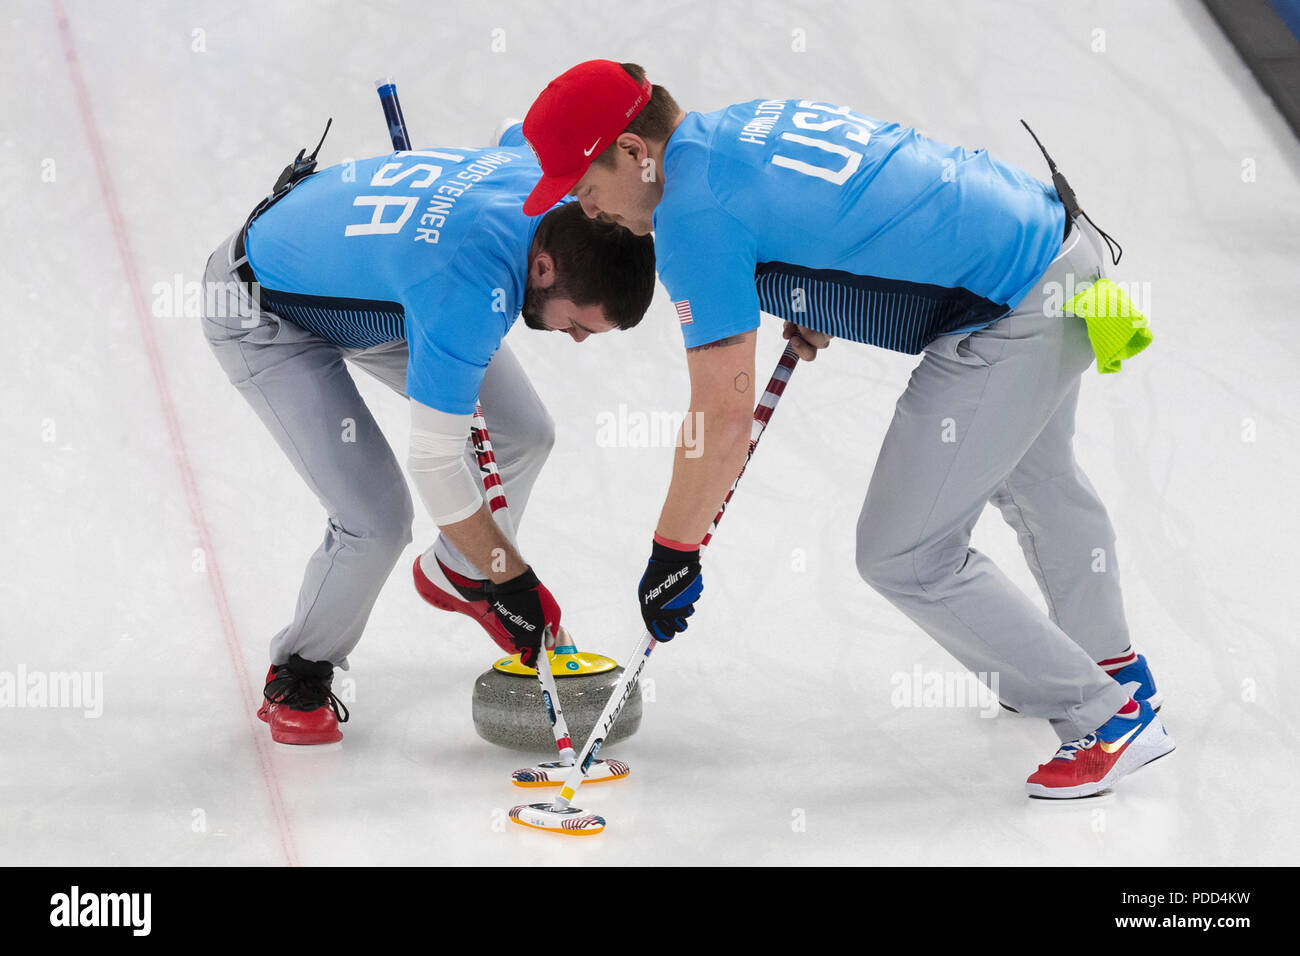 Team USA vs Team Sweden competing in the Curling Gold Medal Game at the Olympic Winter Games PyeongChang 2018 Stock Photo